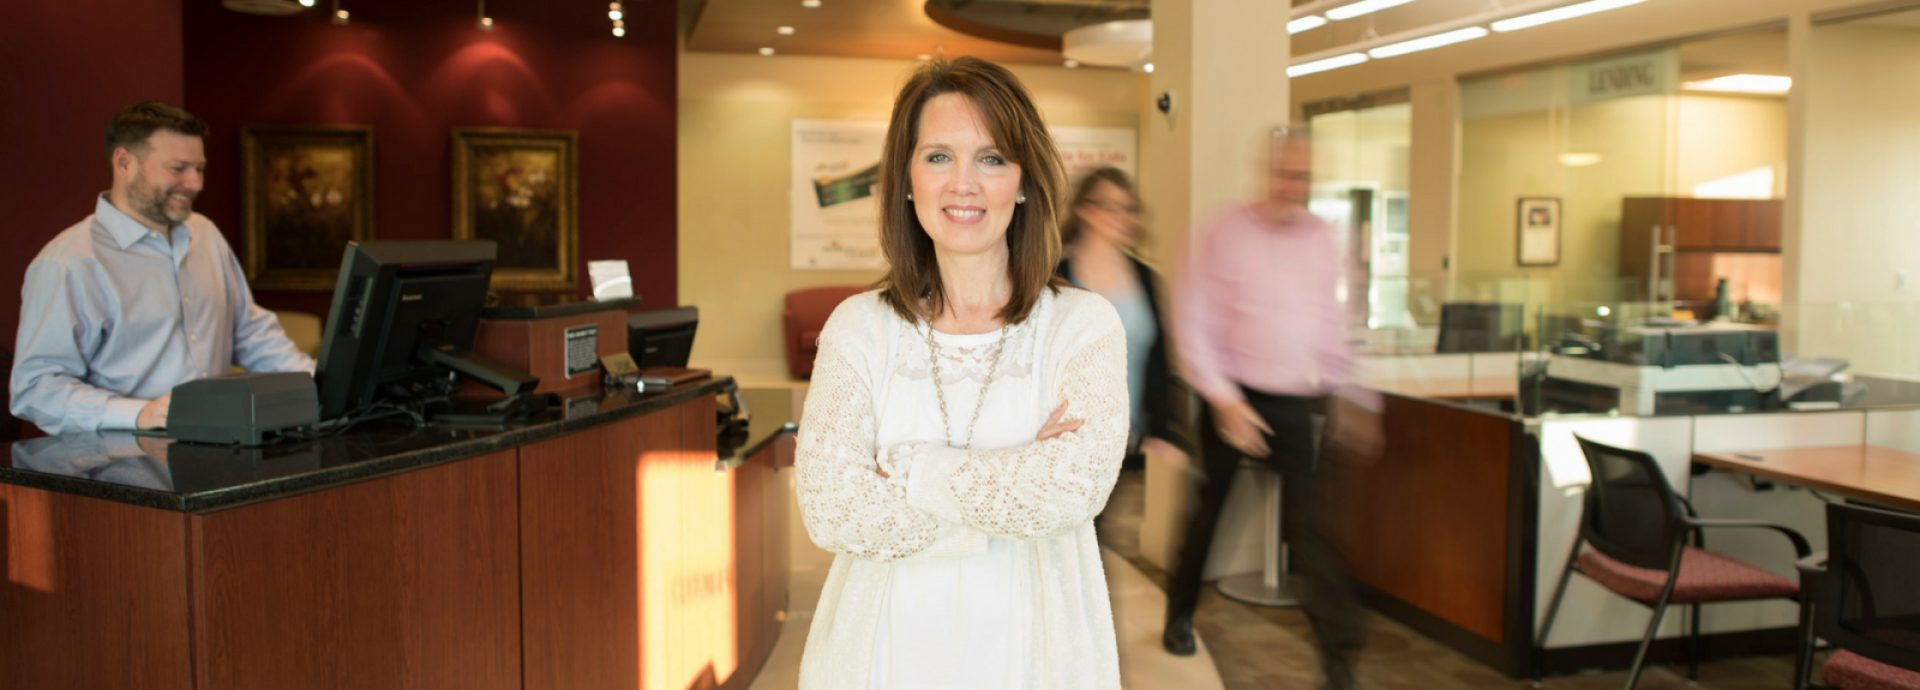 With us, banking is personal - woman standing in lobby smiling